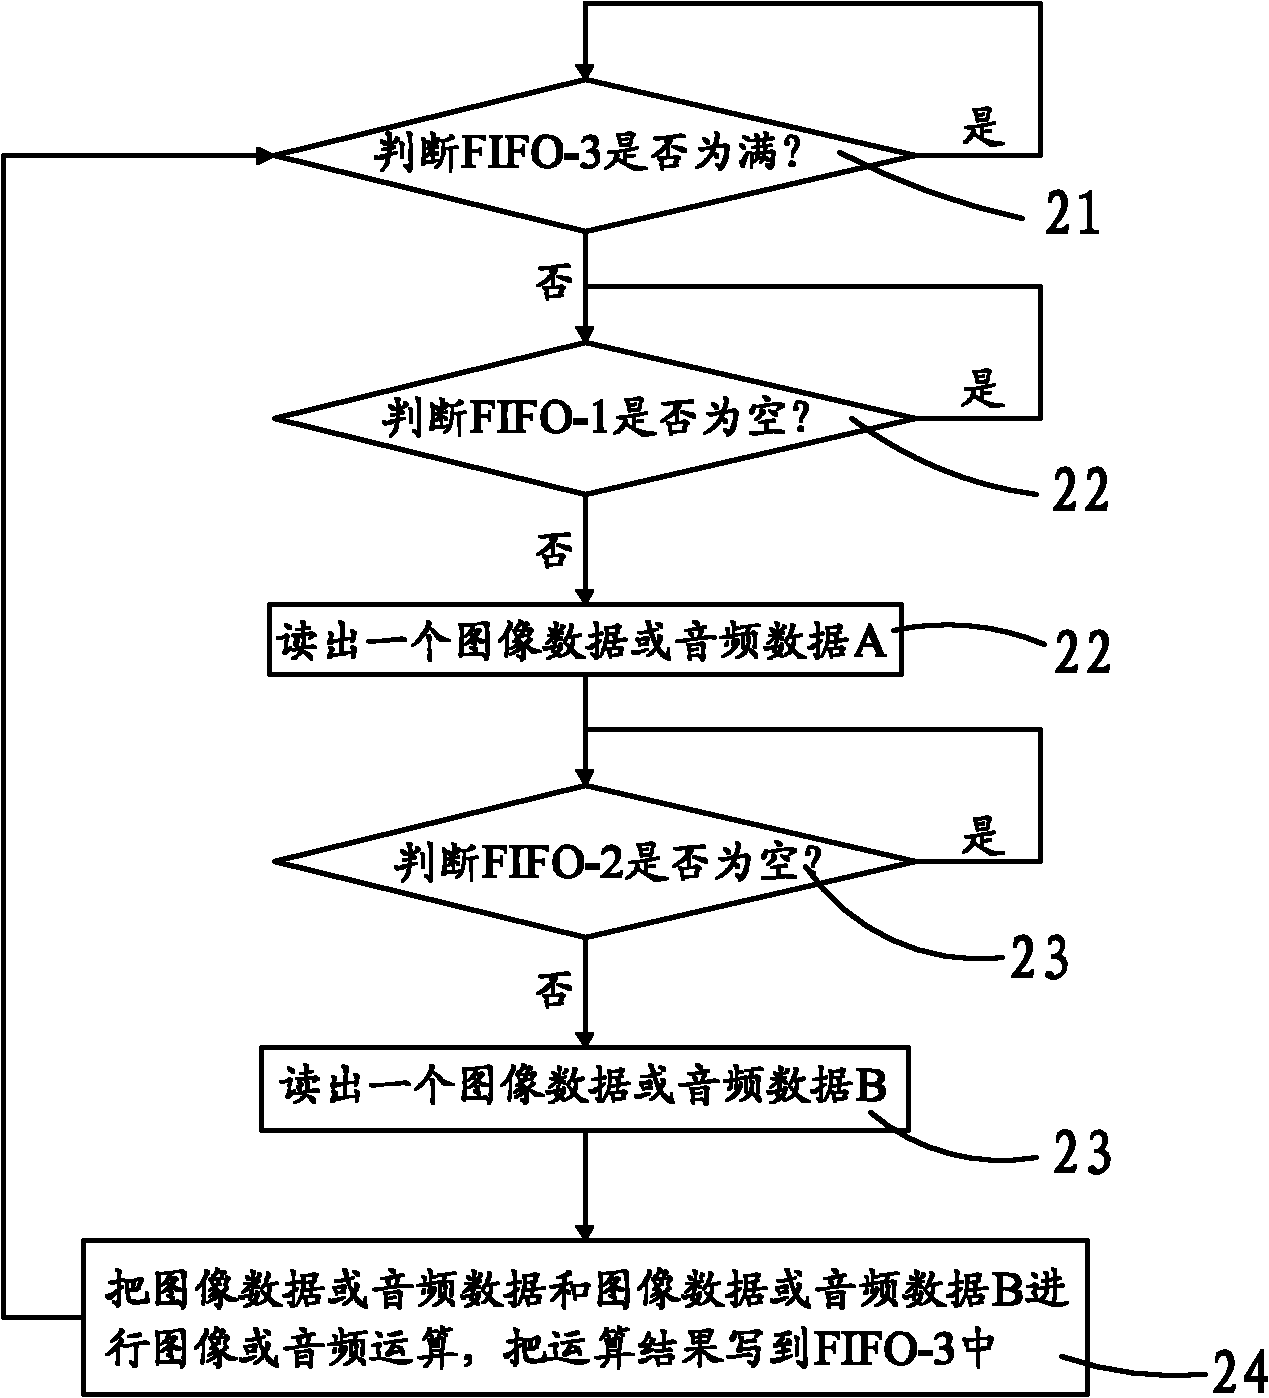 Method and device for superposition processing of image data or audio data